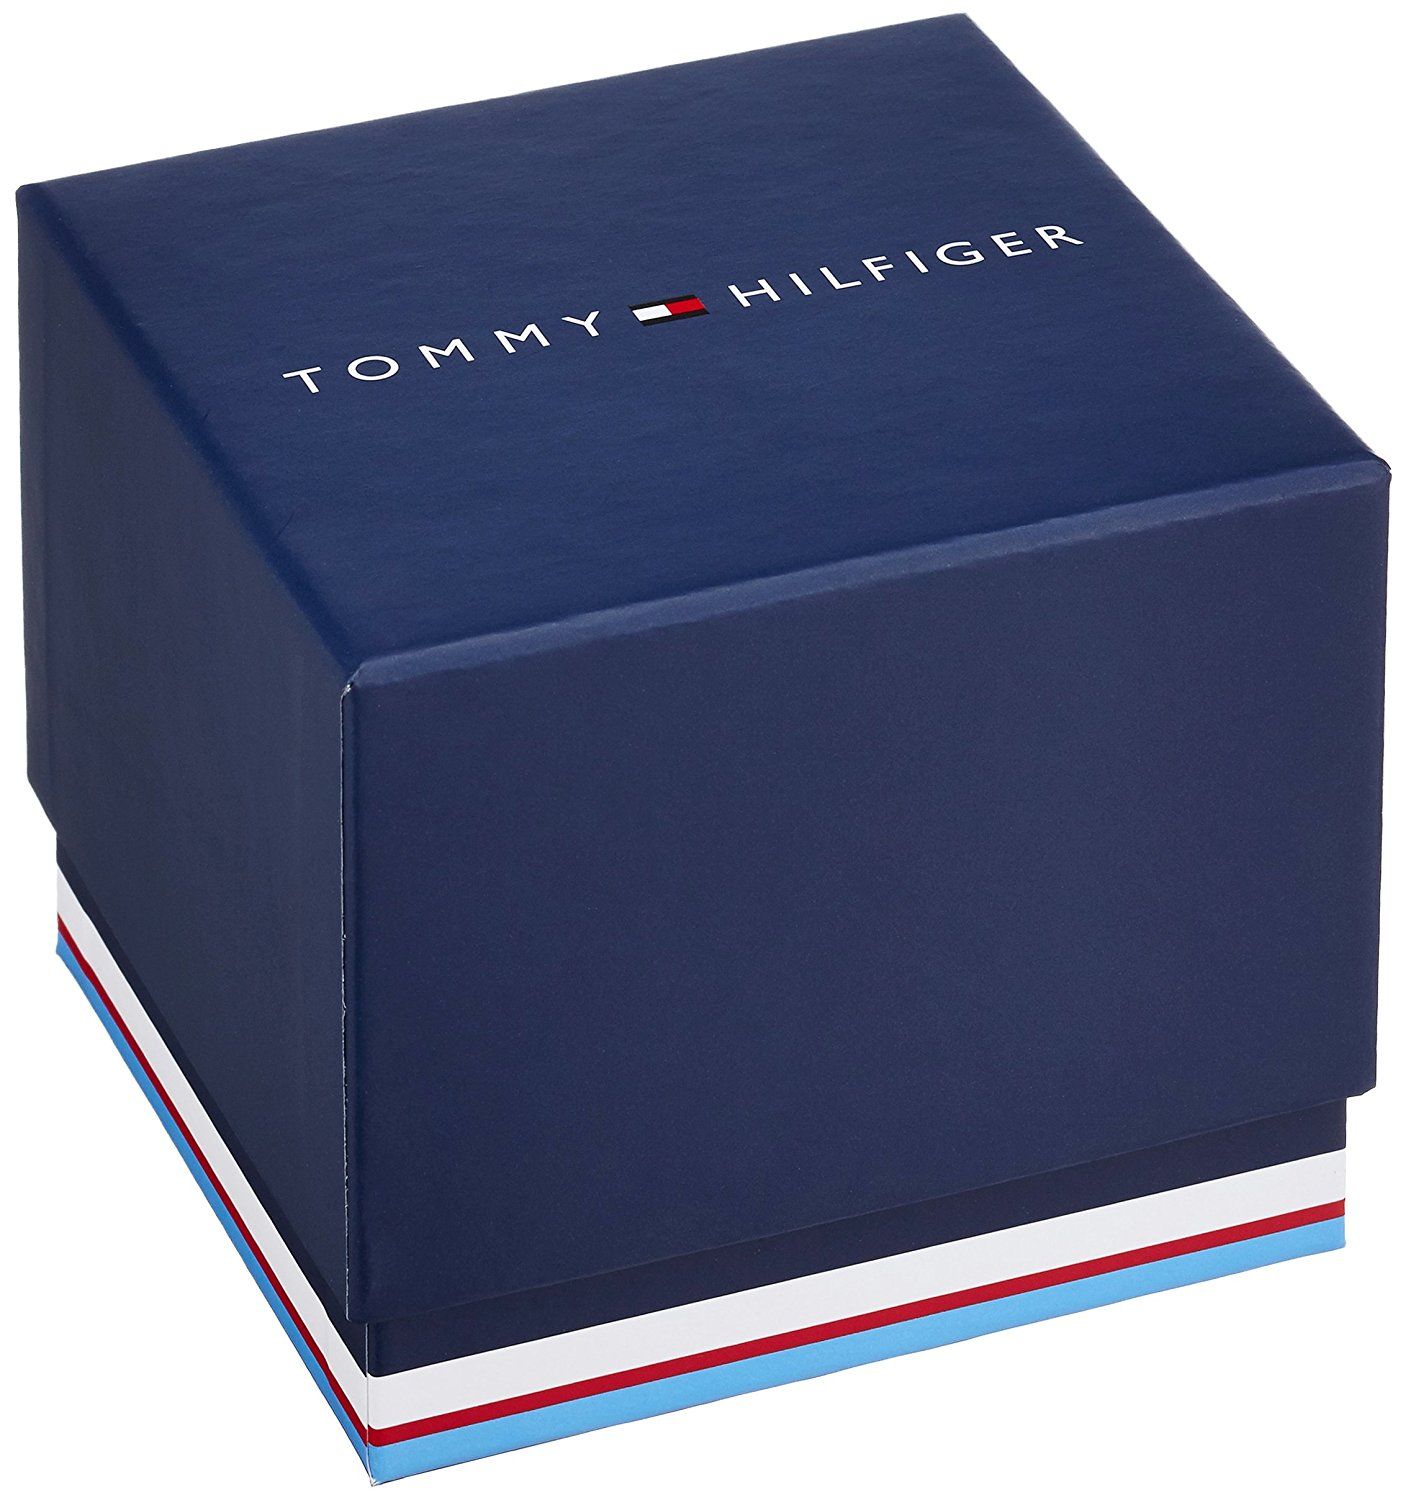 This Tommy Hilfiger Larson Multi Dial Watch for Men is the perfect timepiece to wear or to gift. It's Silver 46 mm Round case combined with the comfortable Silver Stainless steel will ensure you enjoy this stunning timepiece without any compromise. Operated by a high quality Quartz movement and water resistant to 5 bars, your watch will keep ticking. This fashionable watch with numbers on the bezel is a perfect gift for New Year, birthdays, Valentine's day and so on. -The watch has a calendar function: Day-Date, 24-hour Display. High quality 21 cm length and 20 mm width. Silver Stainless steel strap with a Fold over with push button clasp. Case diameter: 46 mm, case thickness: 10 mm, case colour: Silver and dial colour: Blue